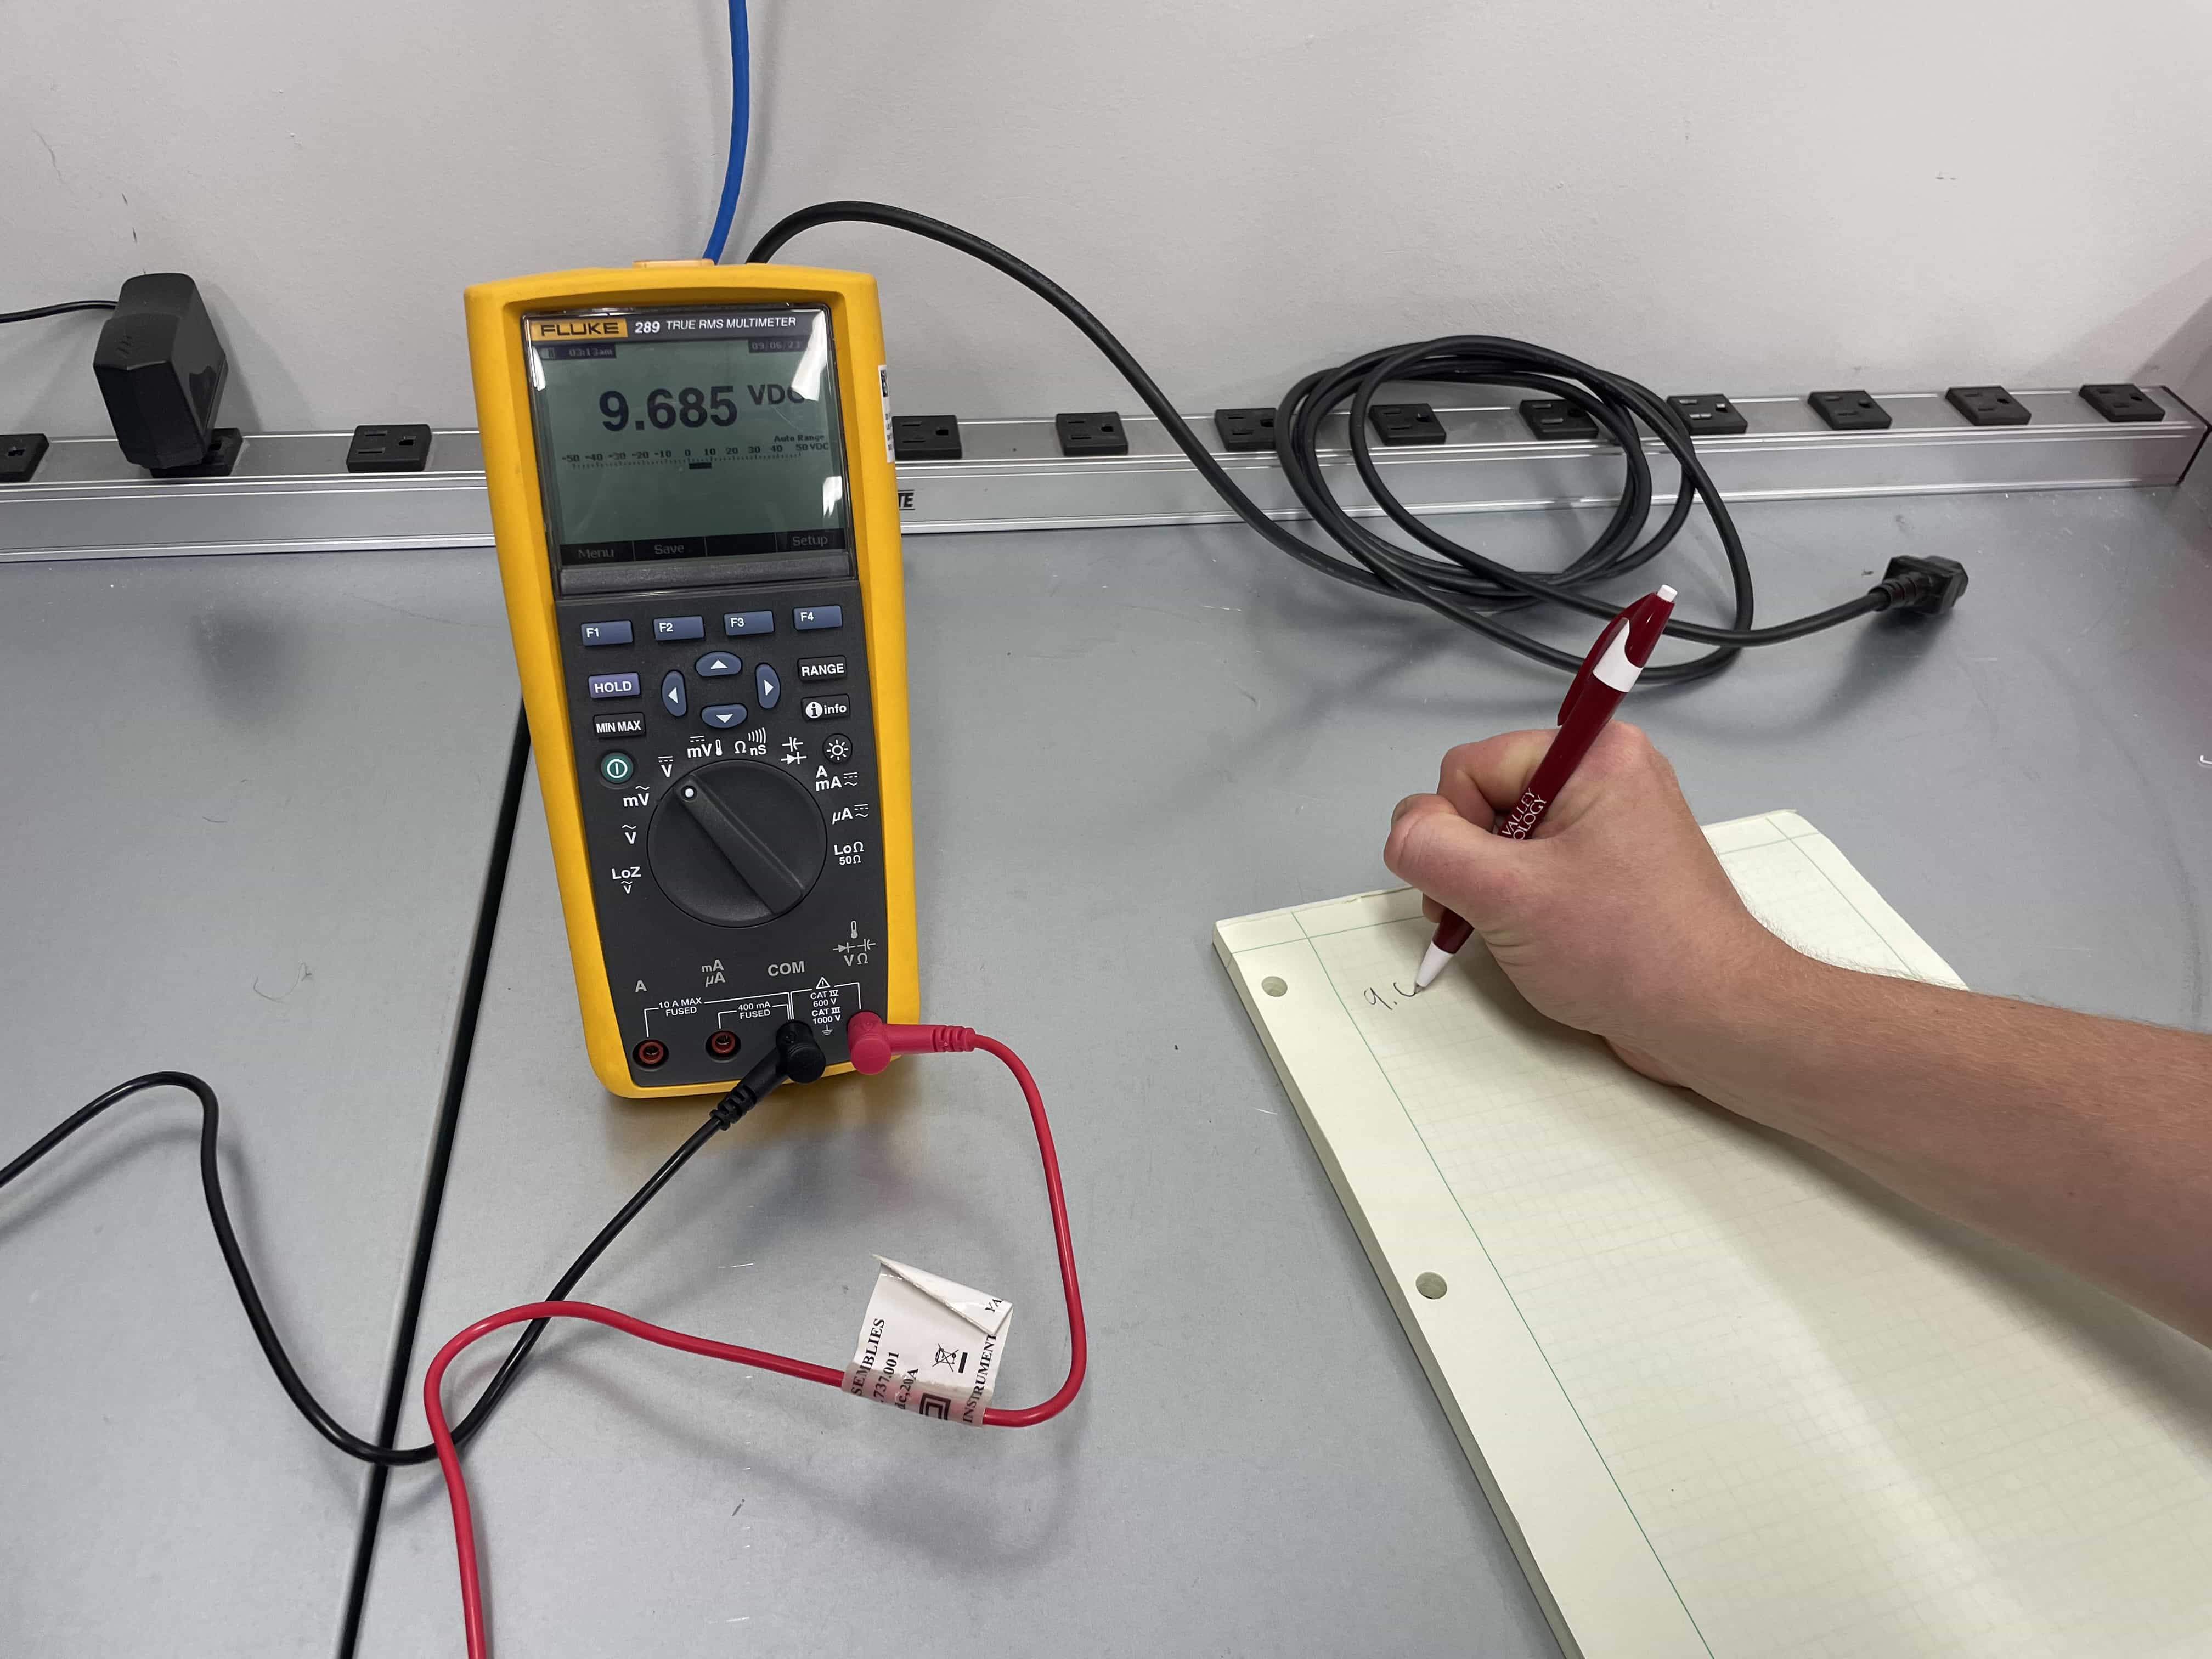 How to Use a Multimeter - Read and Record the Measurement Results